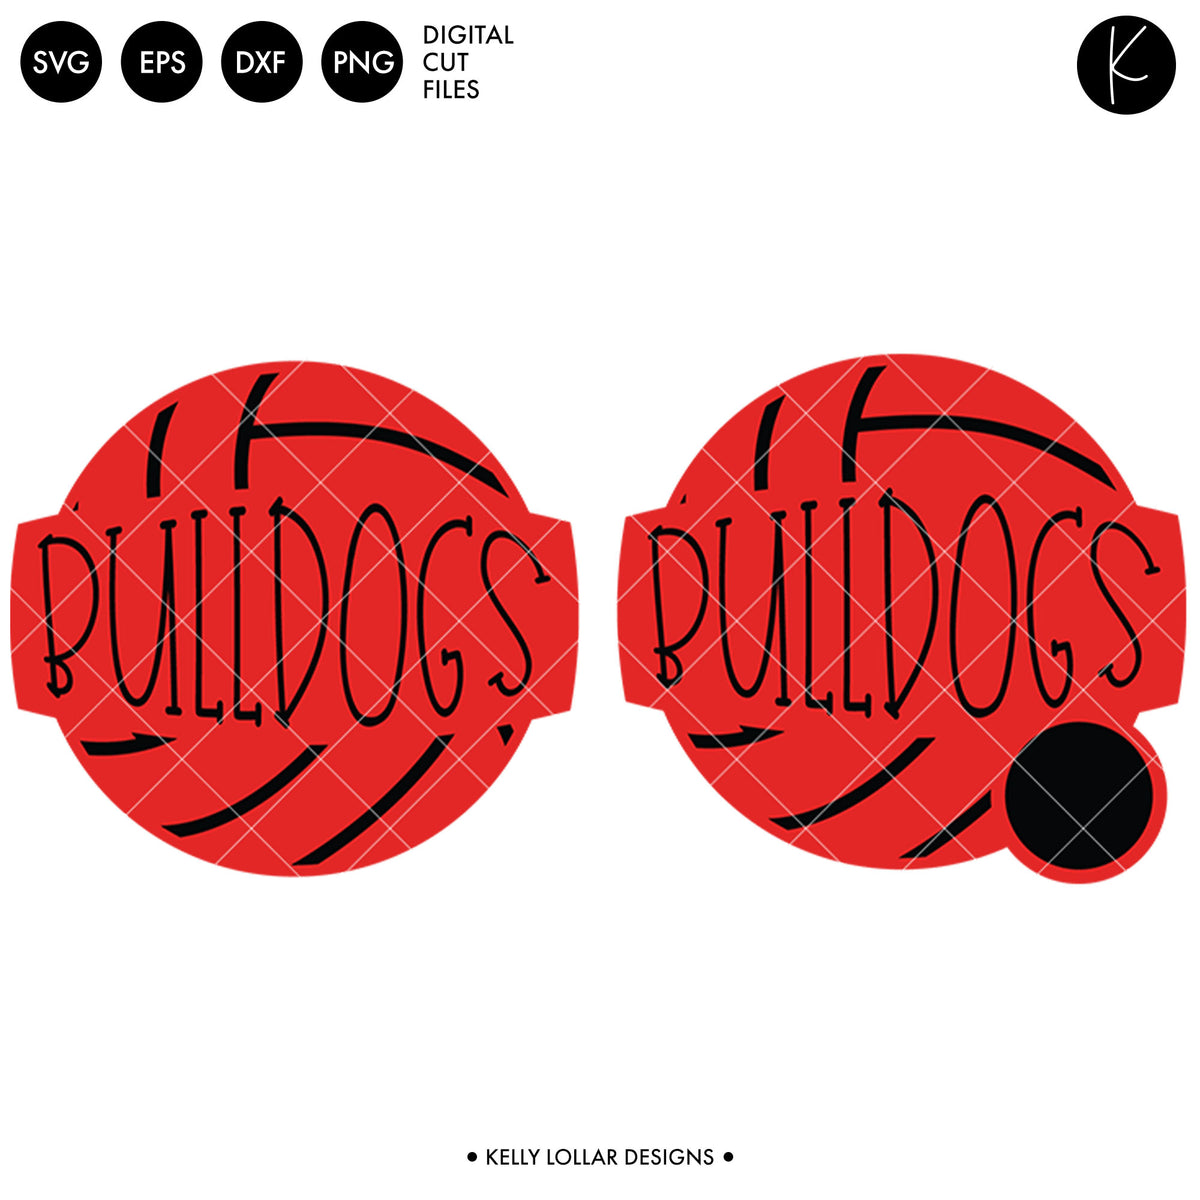 Bulldogs Volleyball Bundle | SVG DXF EPS PNG Cut Files